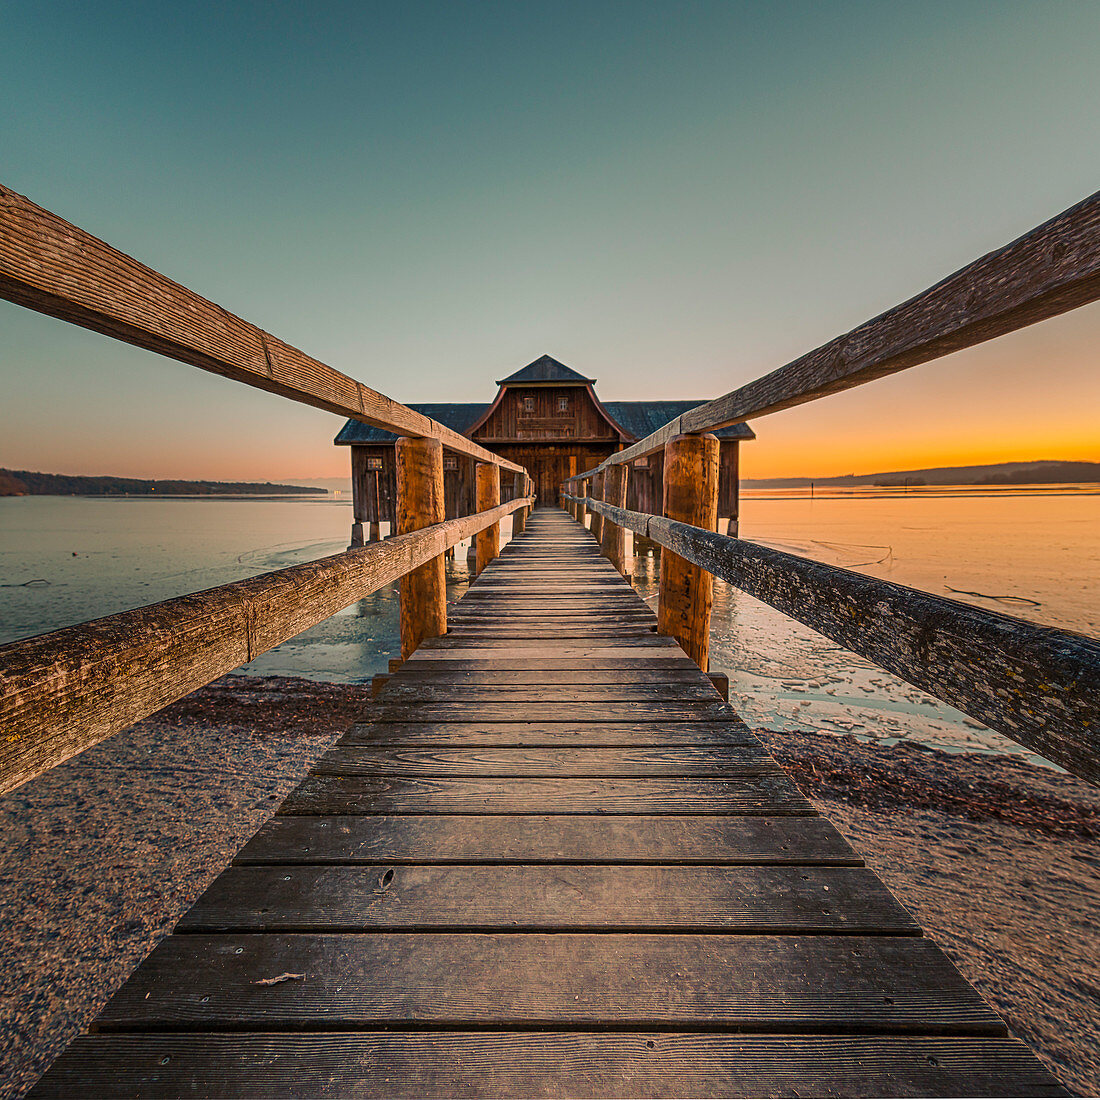 on the jetty to the boathouse during a romantic sunset, Stegen, Bavaria, Germany